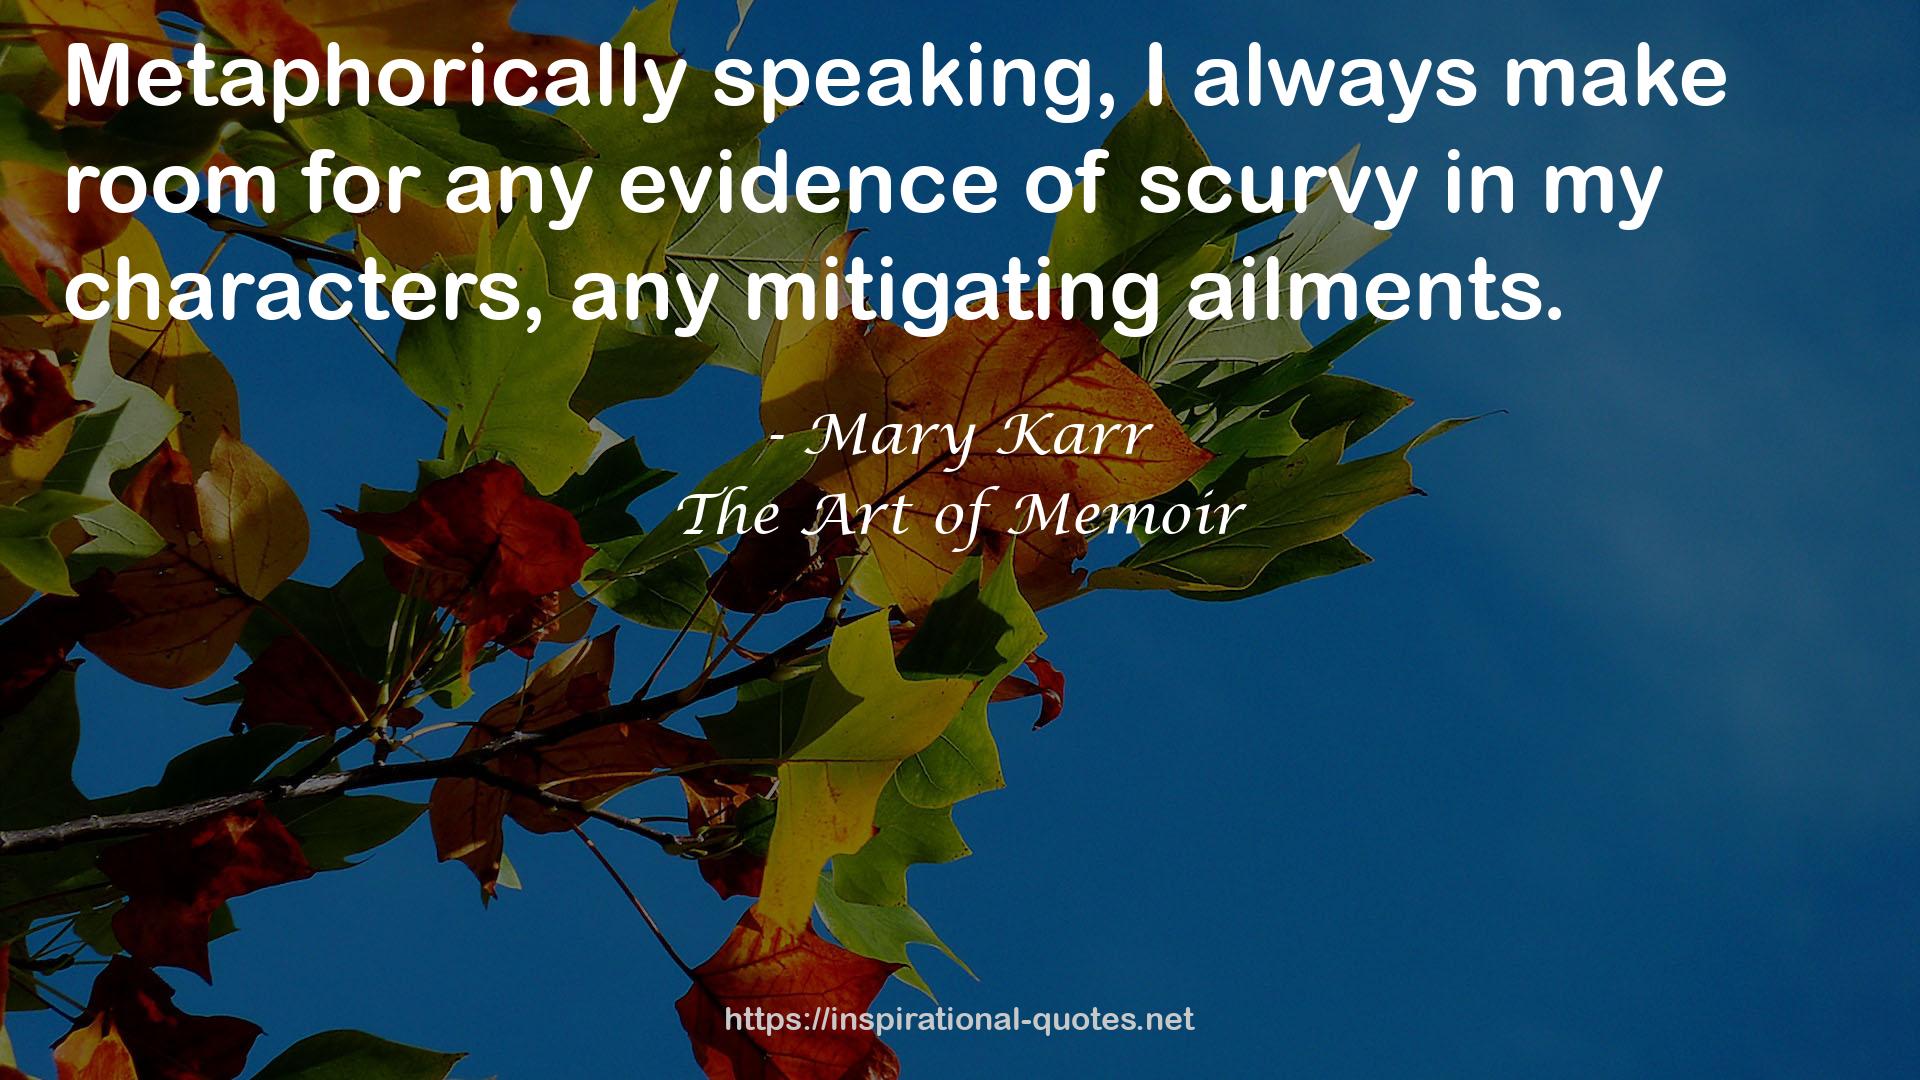 Mary Karr QUOTES